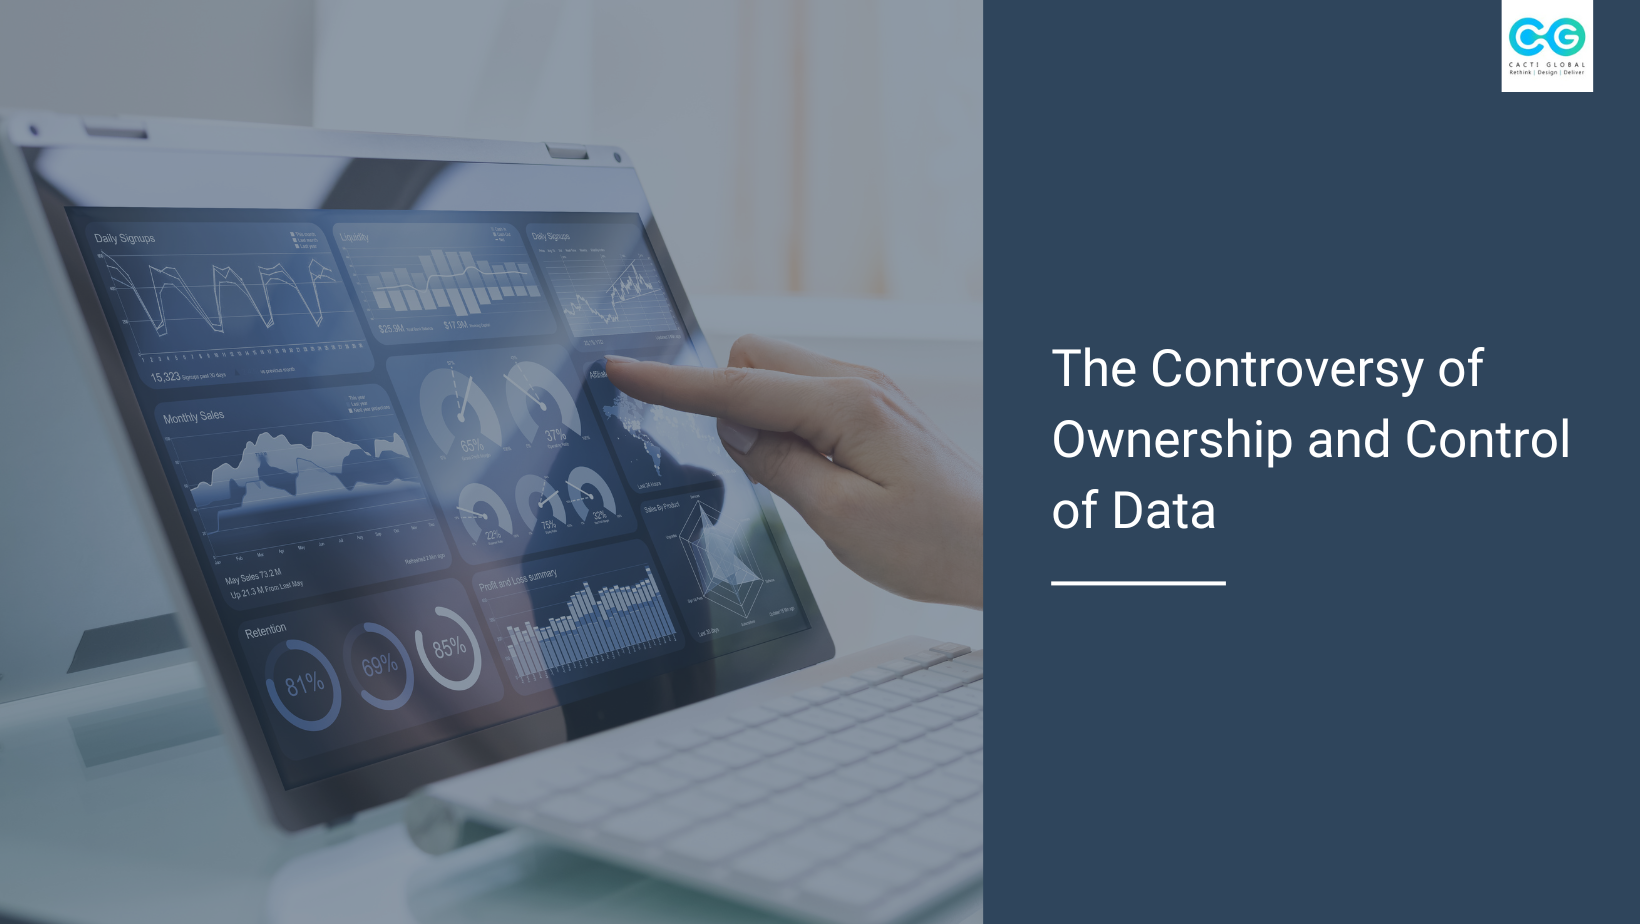 Ownership and control of data